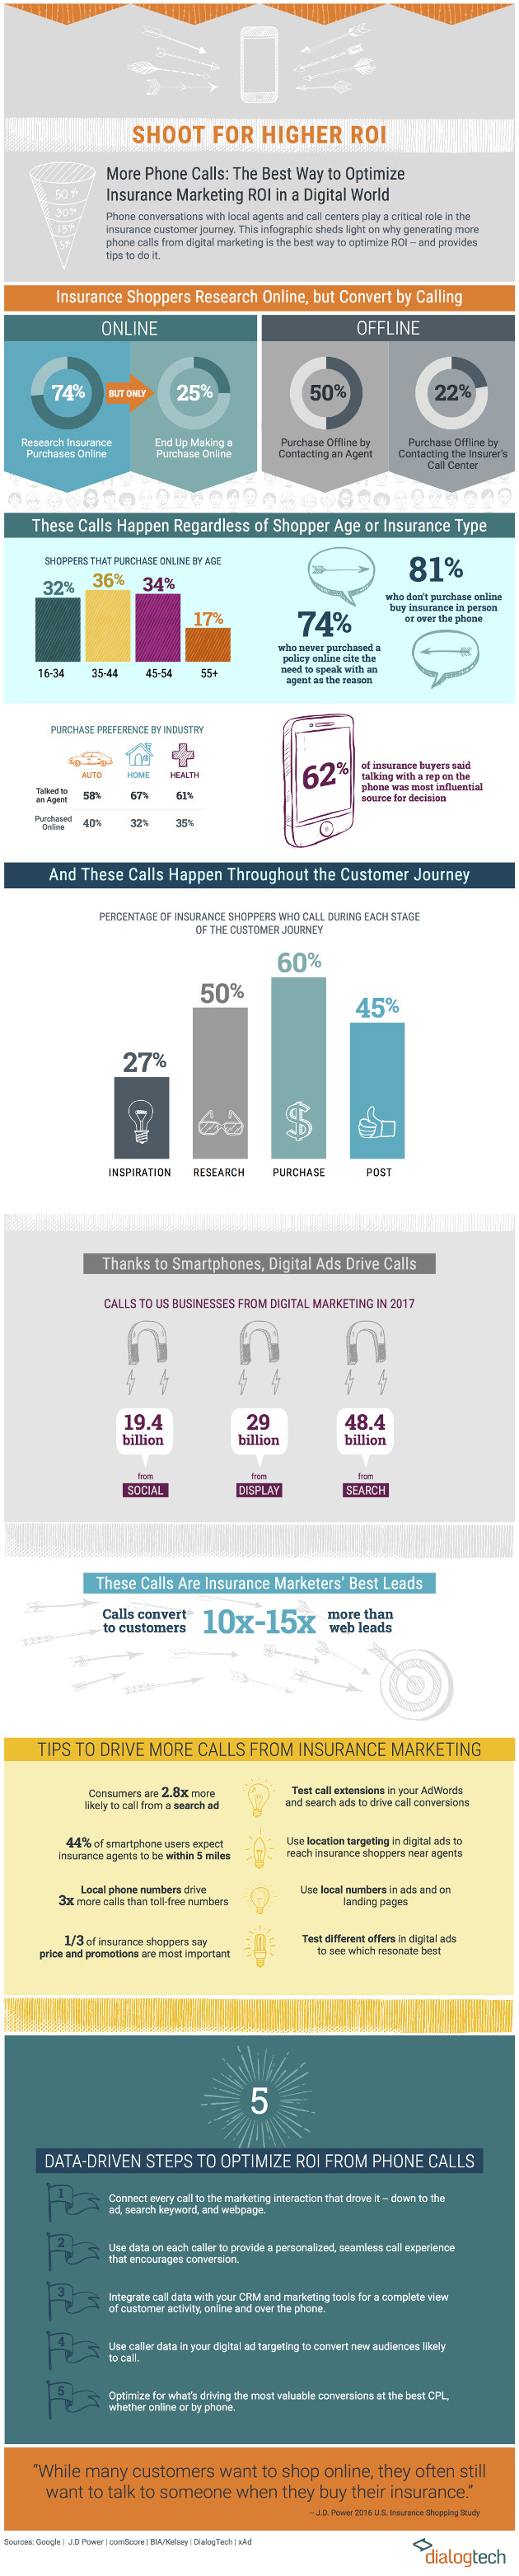 How Phone Calls Can Help Insurance Marketers Increase ROI [Infographic]